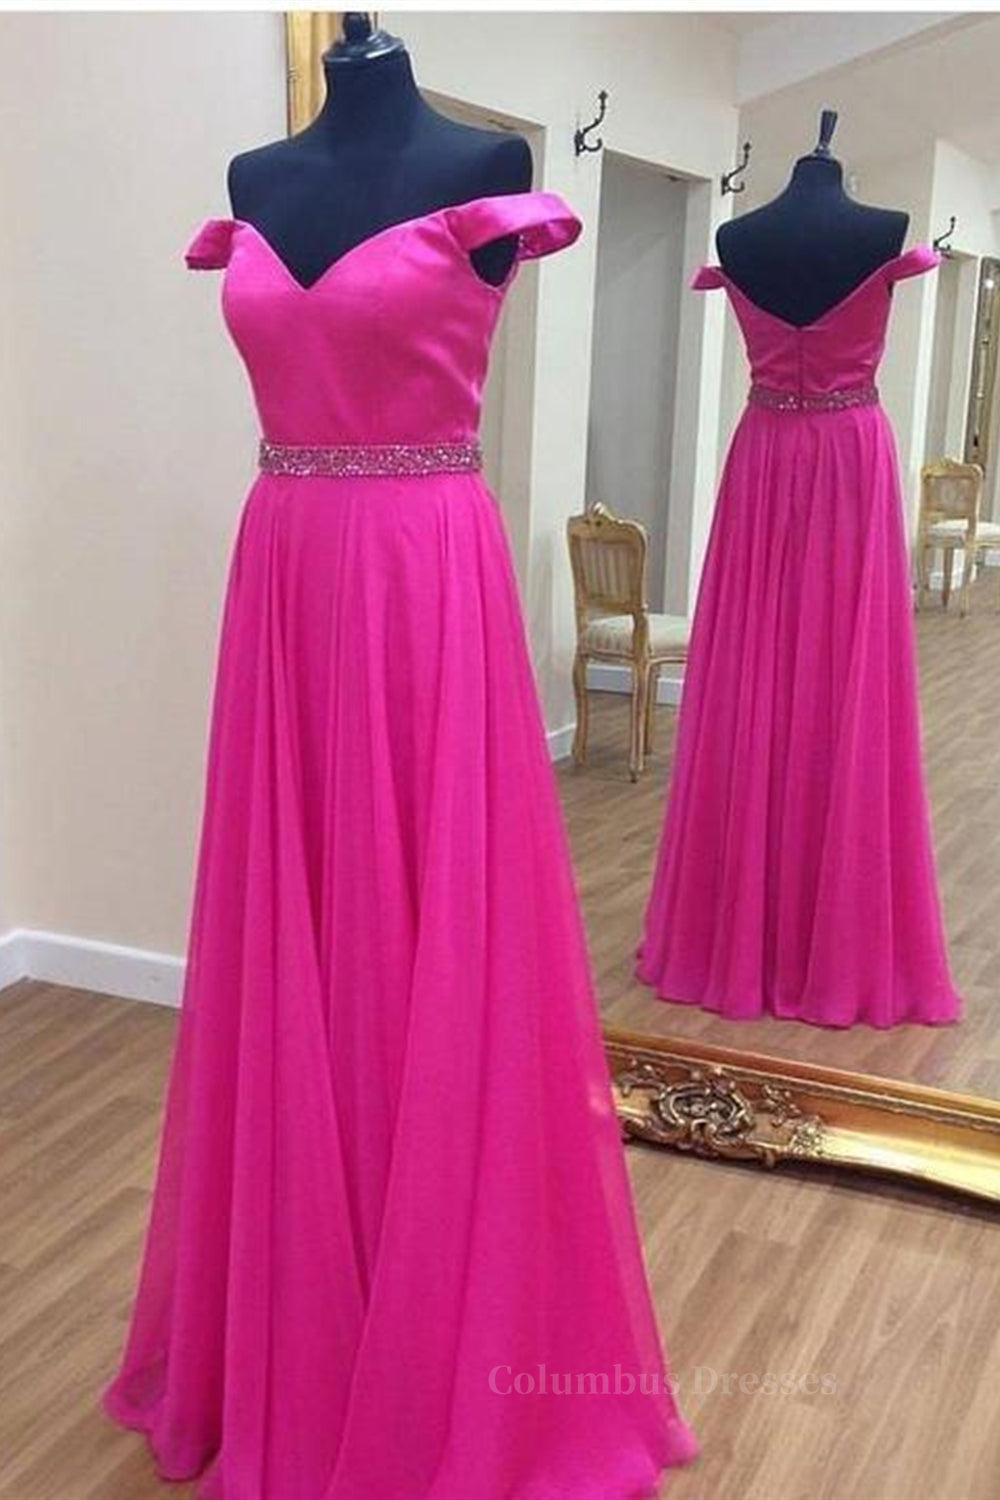 Party Dress Short Tight, Off the Shoulder Fuchsia Long Prom Dresses with Belt, Off Shoulder Fuchsia Formal Evening Dresses